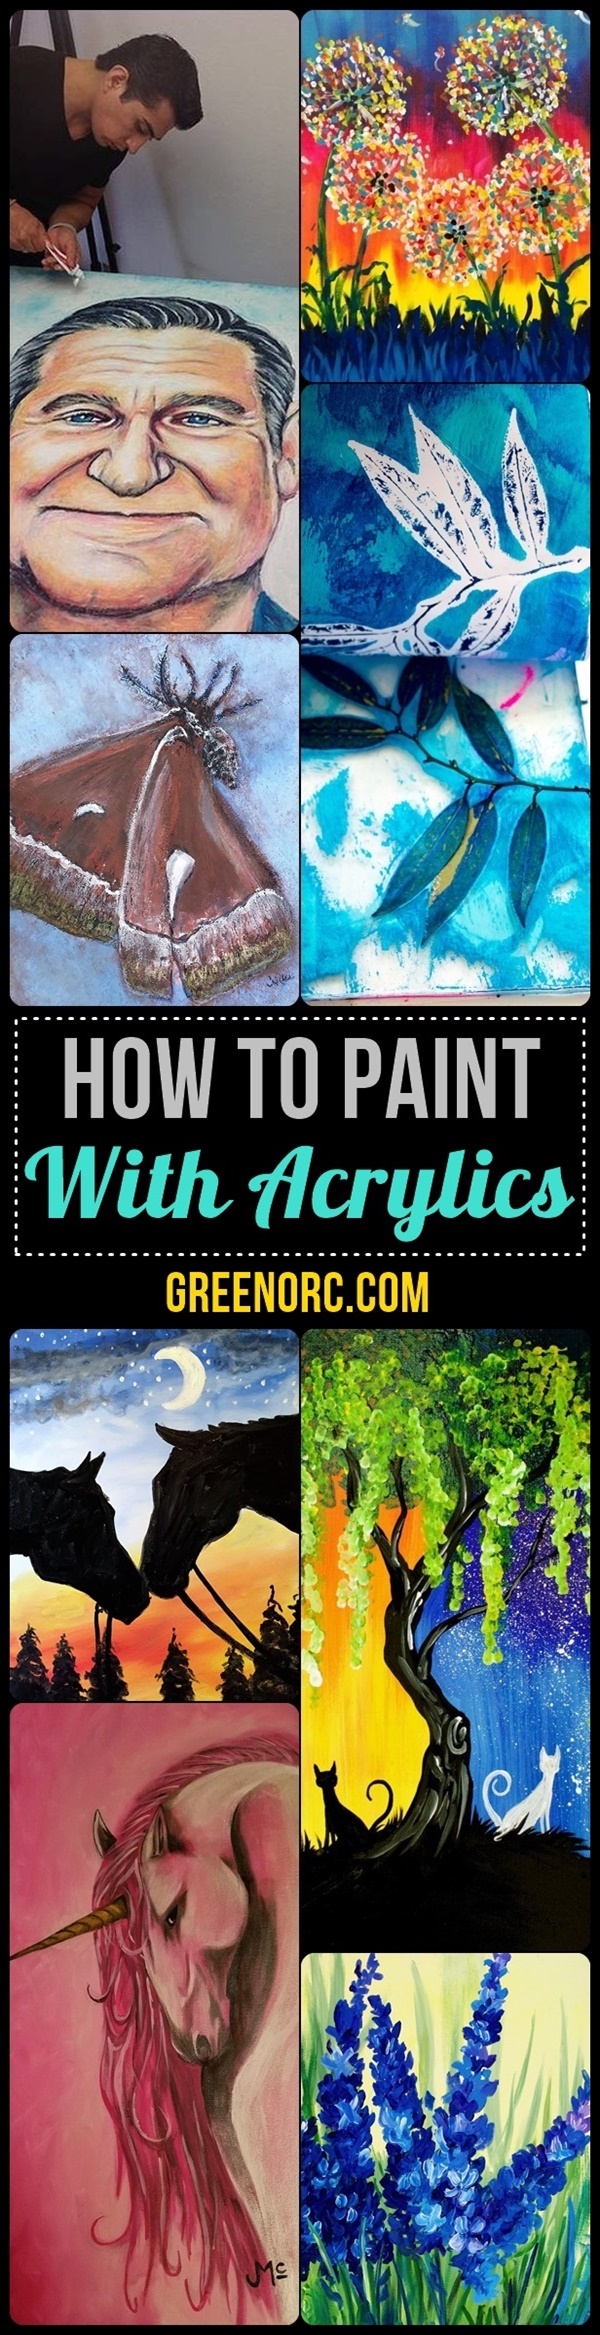 How To Paint With Acrylics